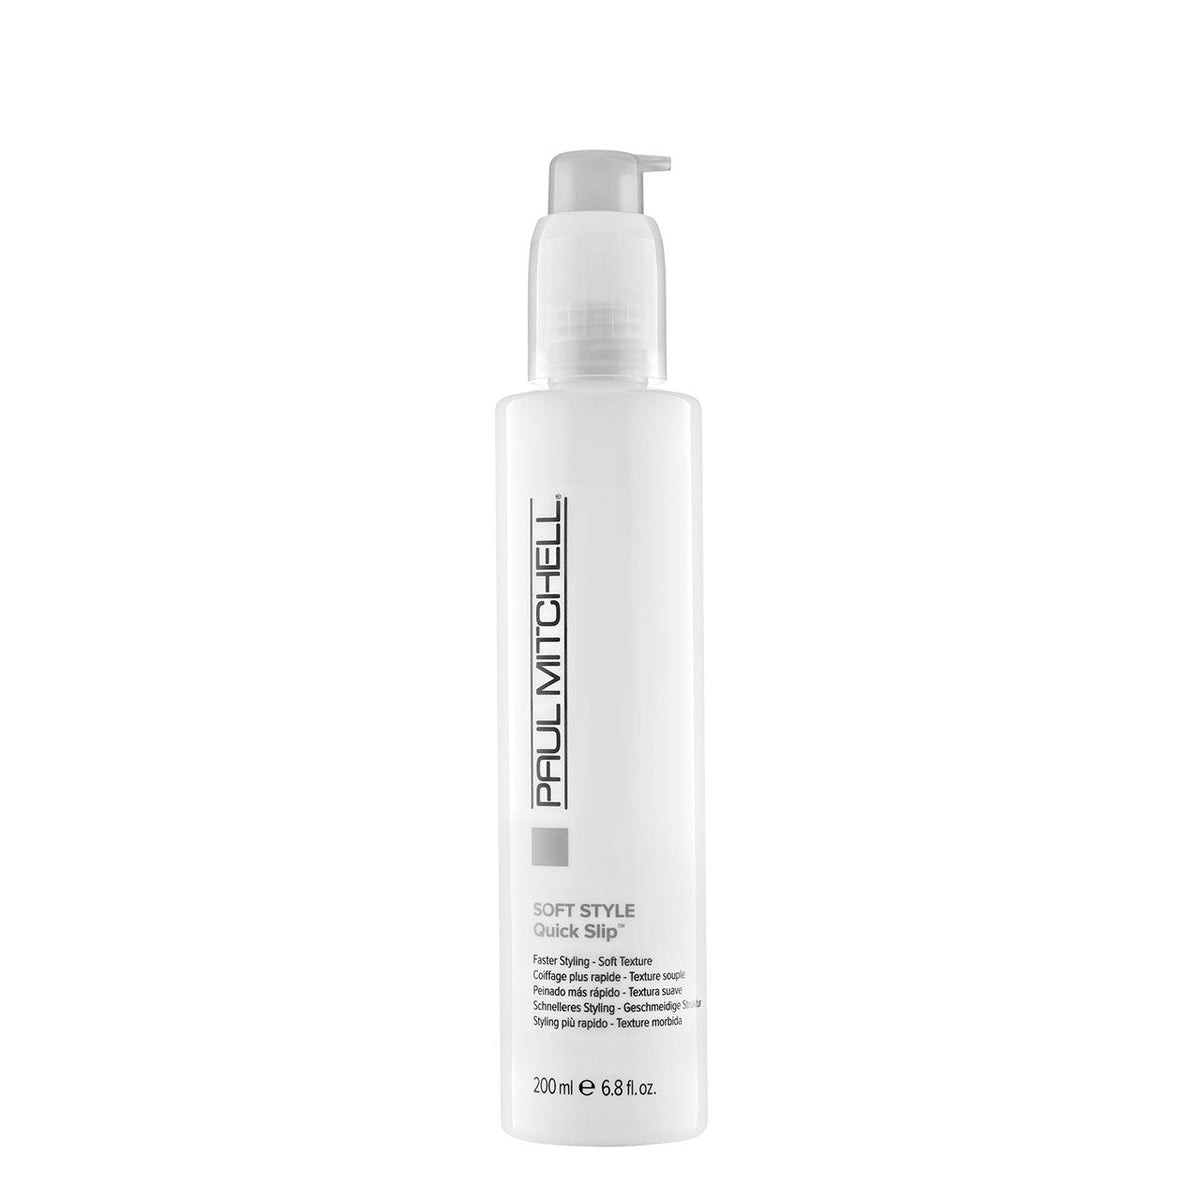 Soft Style Quick Slip Hair Styling Cream - by Paul Mitchell |ProCare Outlet|